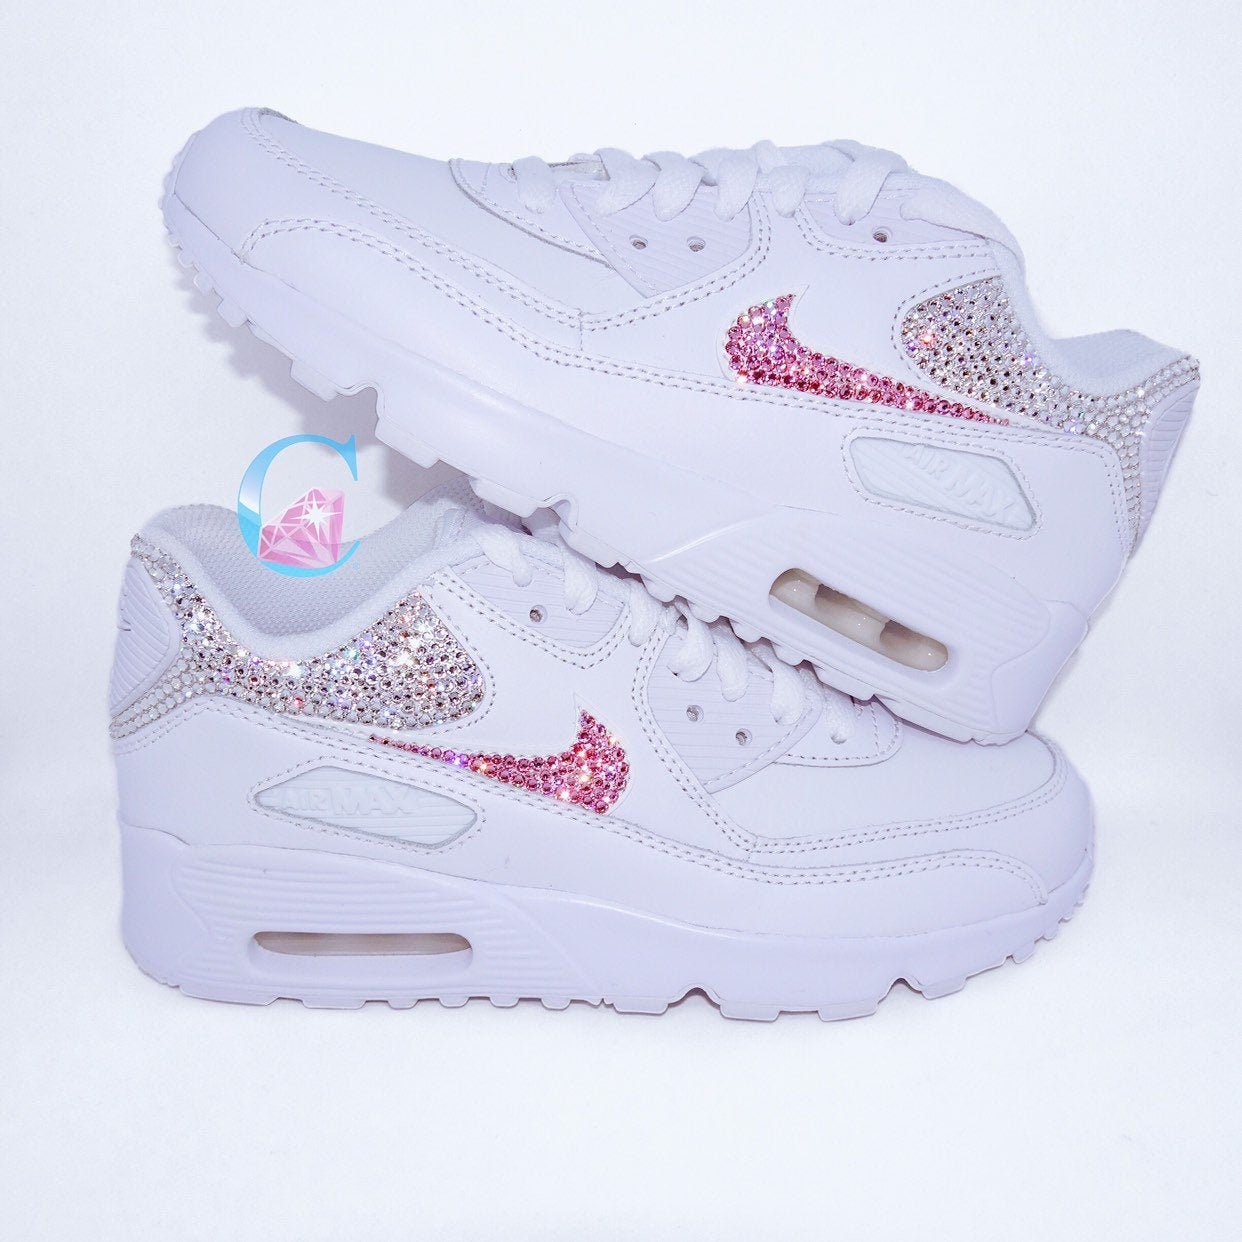 Genuine Bling Nike Air Max 90s Embellished With Genuine - Etsy